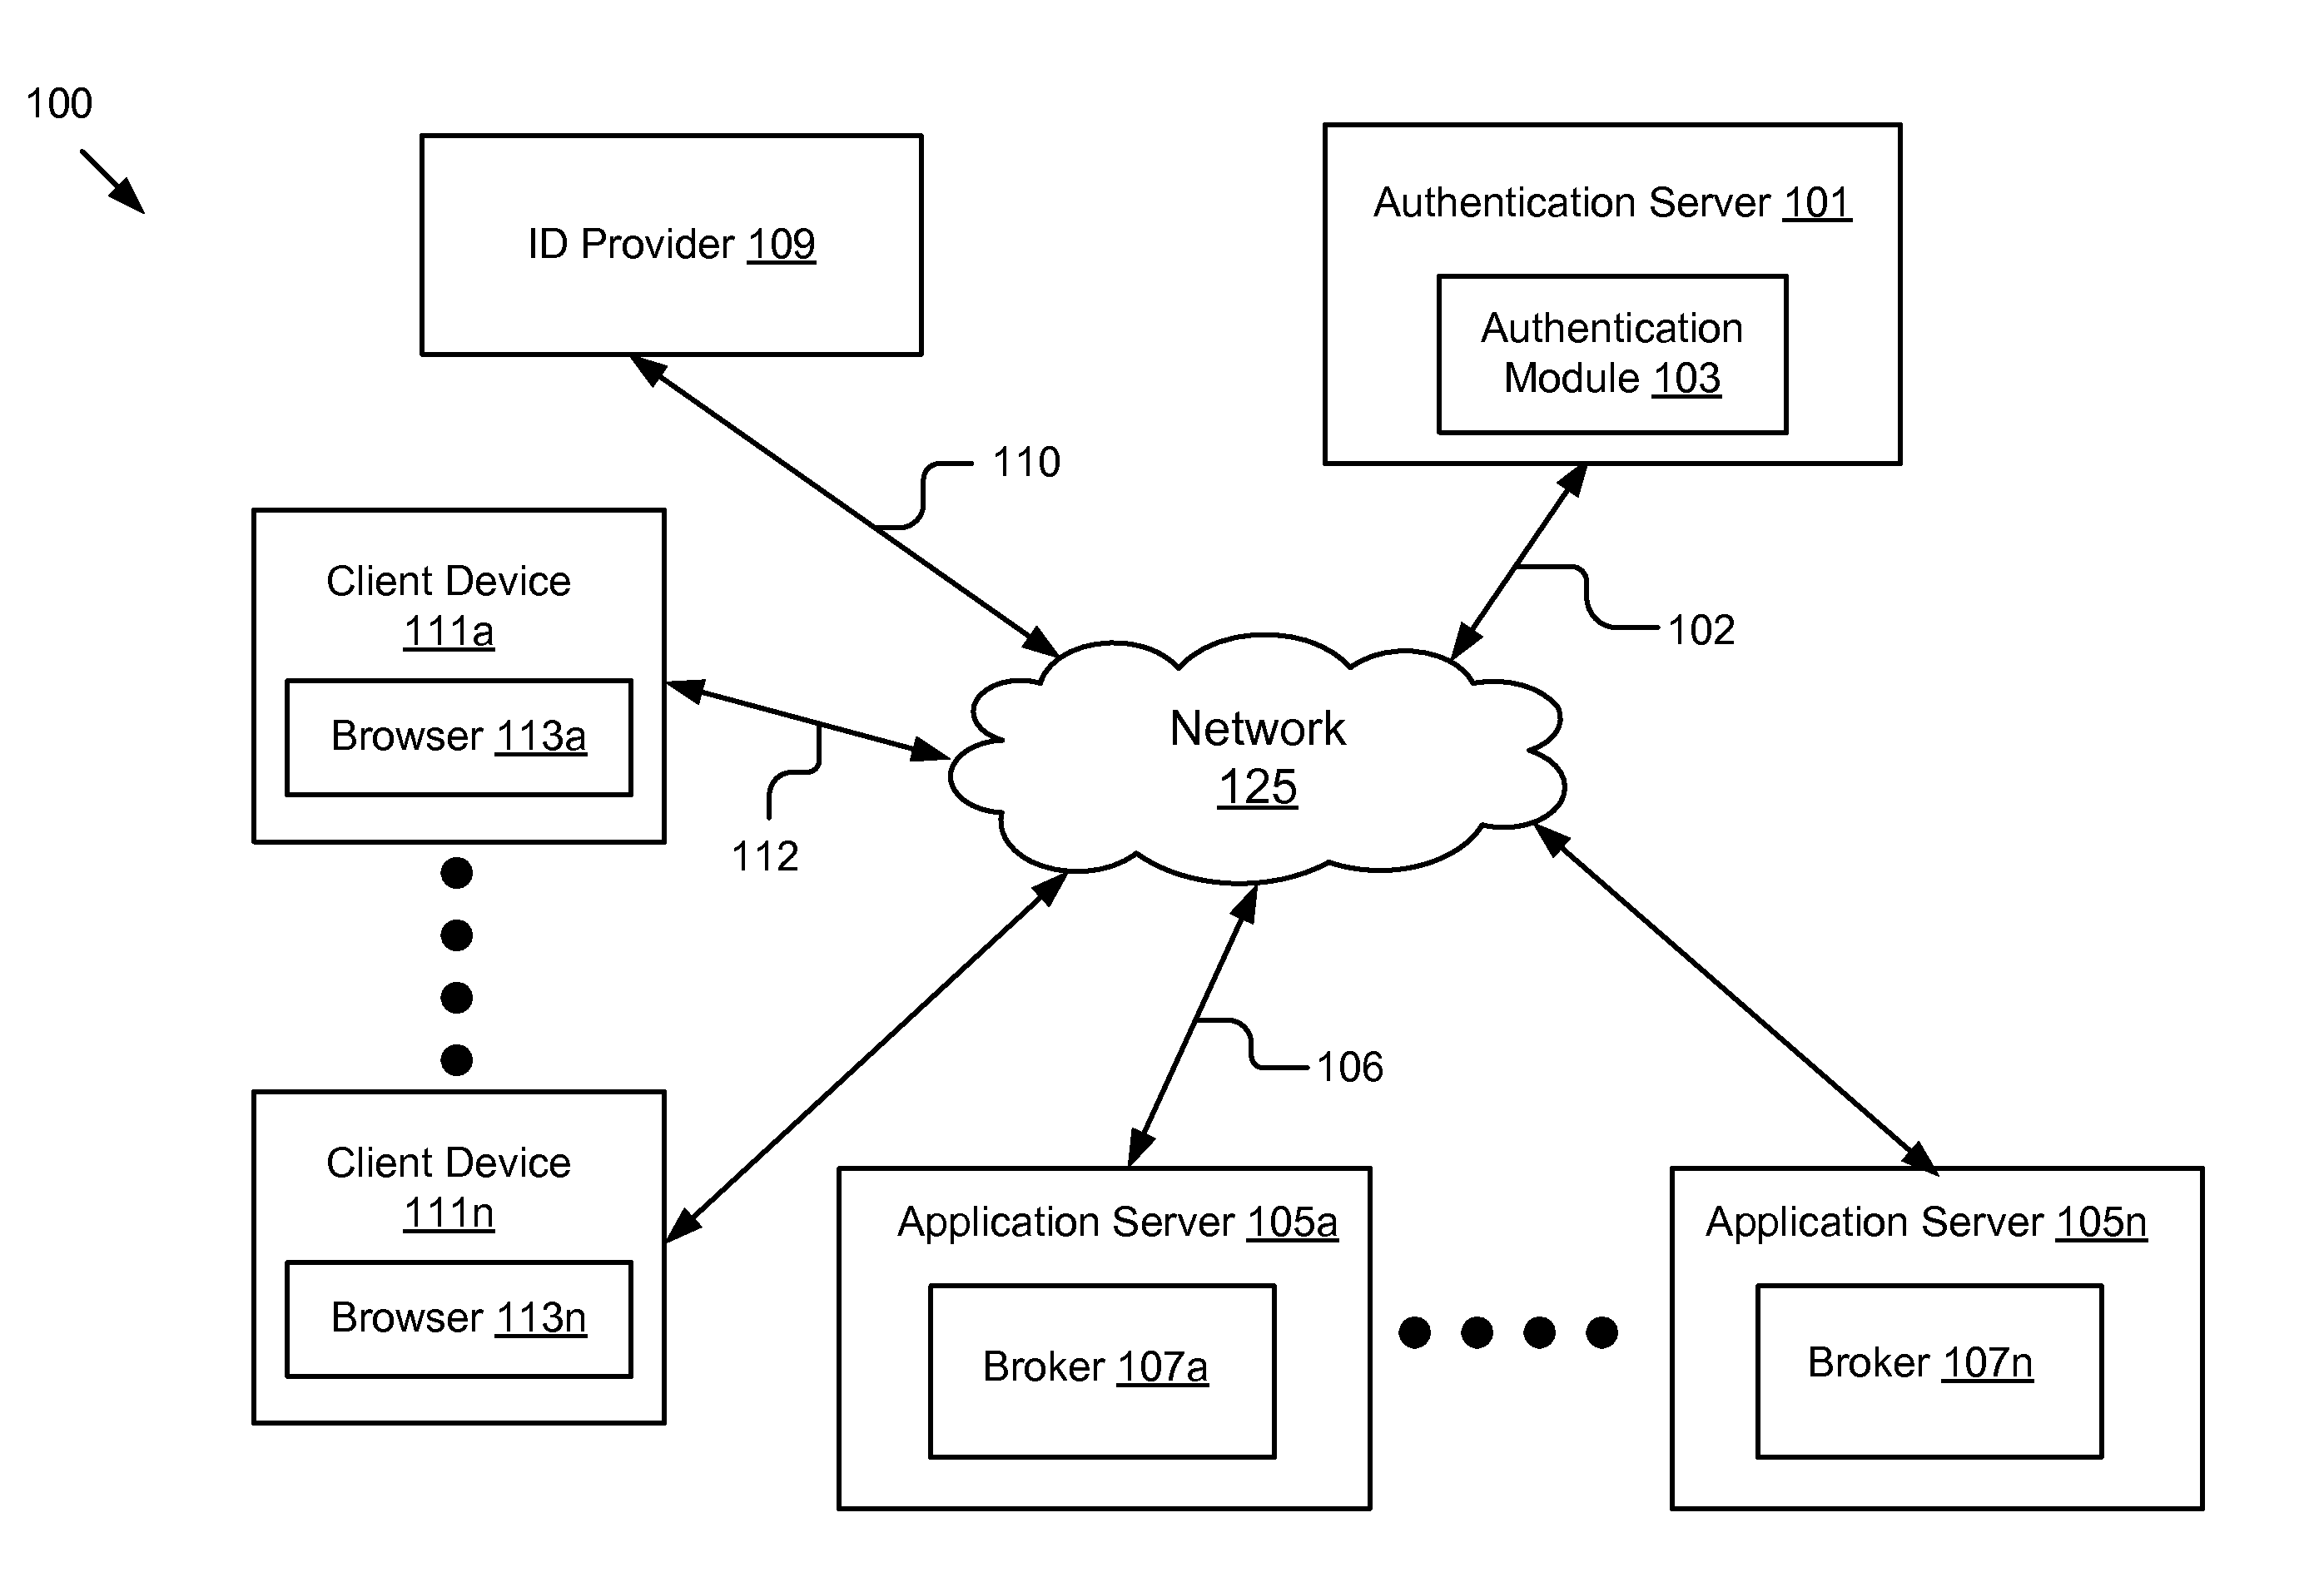 Broker-Based Authentication System Architecture and Design